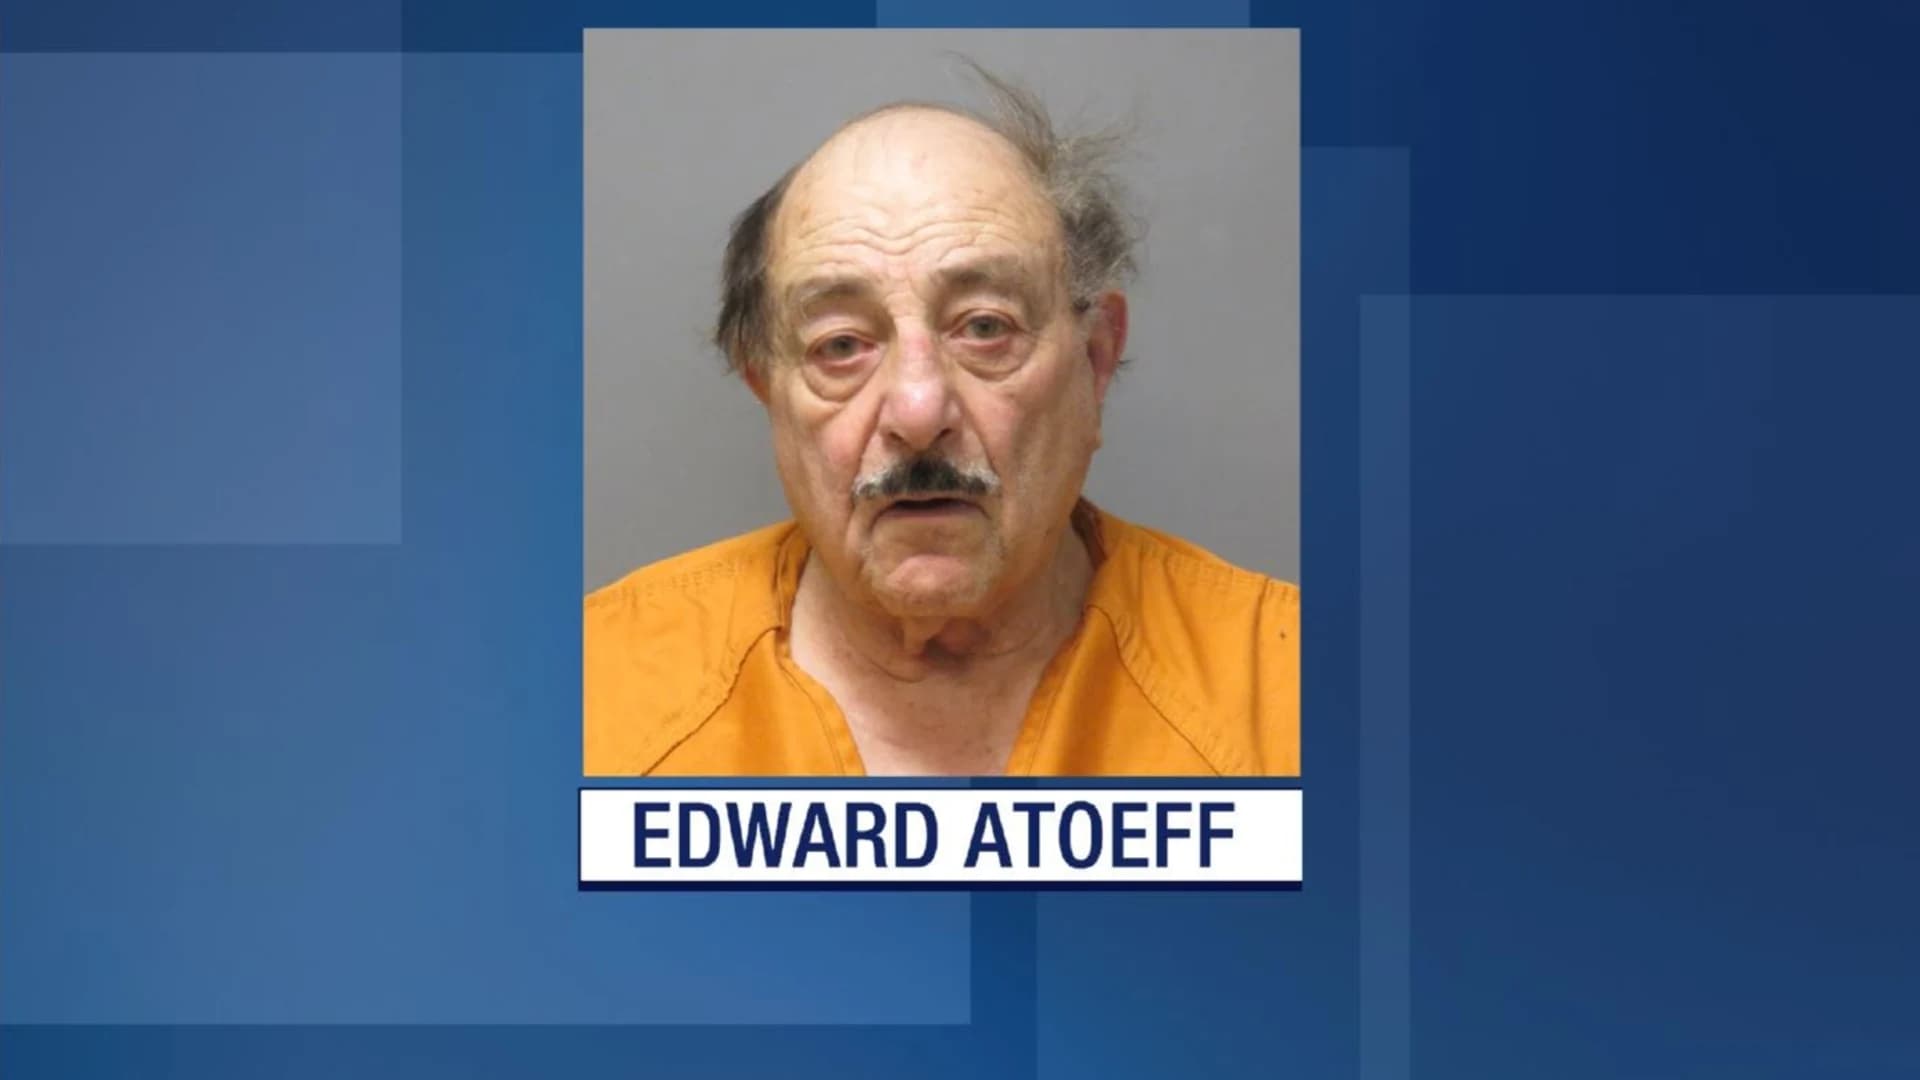 Authorities: School bus driver molested multiple children since the 1960s